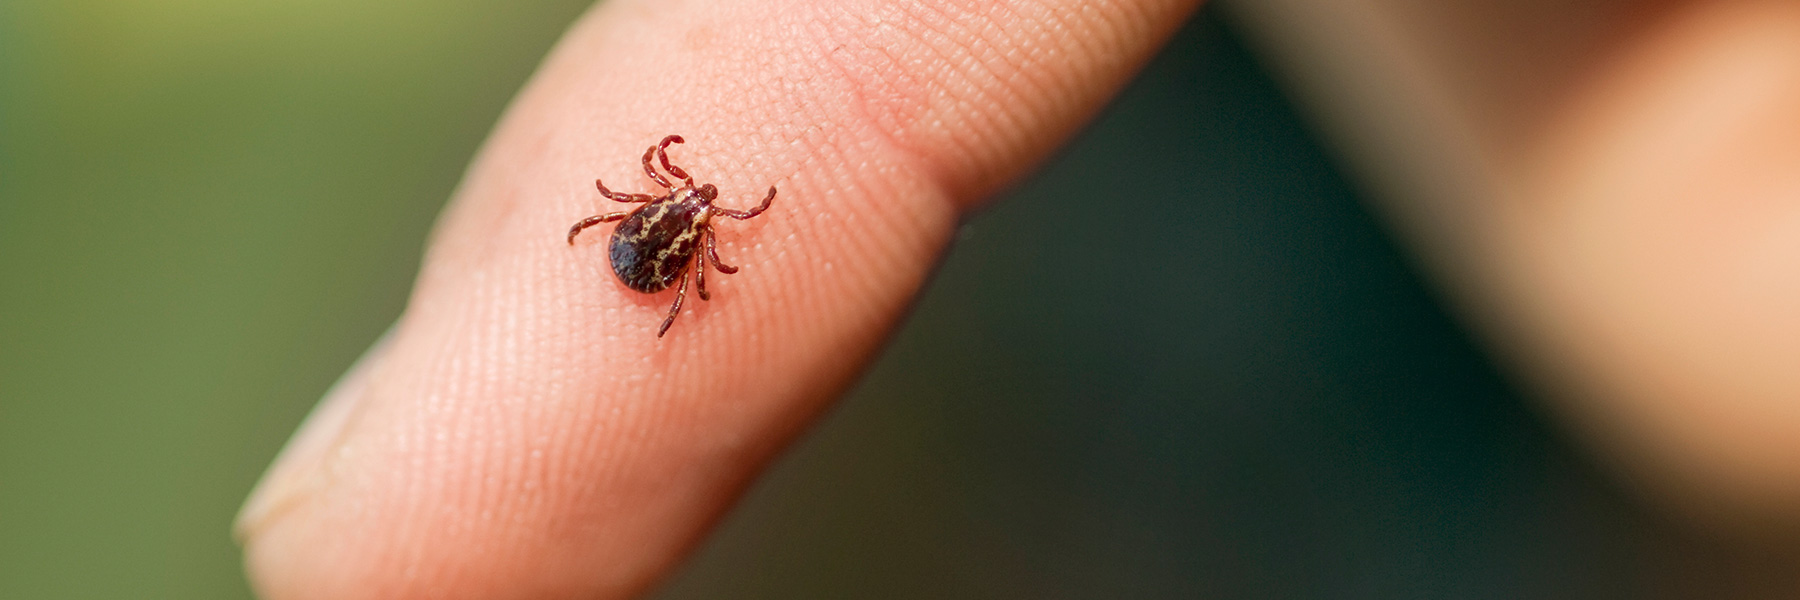 A tick insect on a persons finger